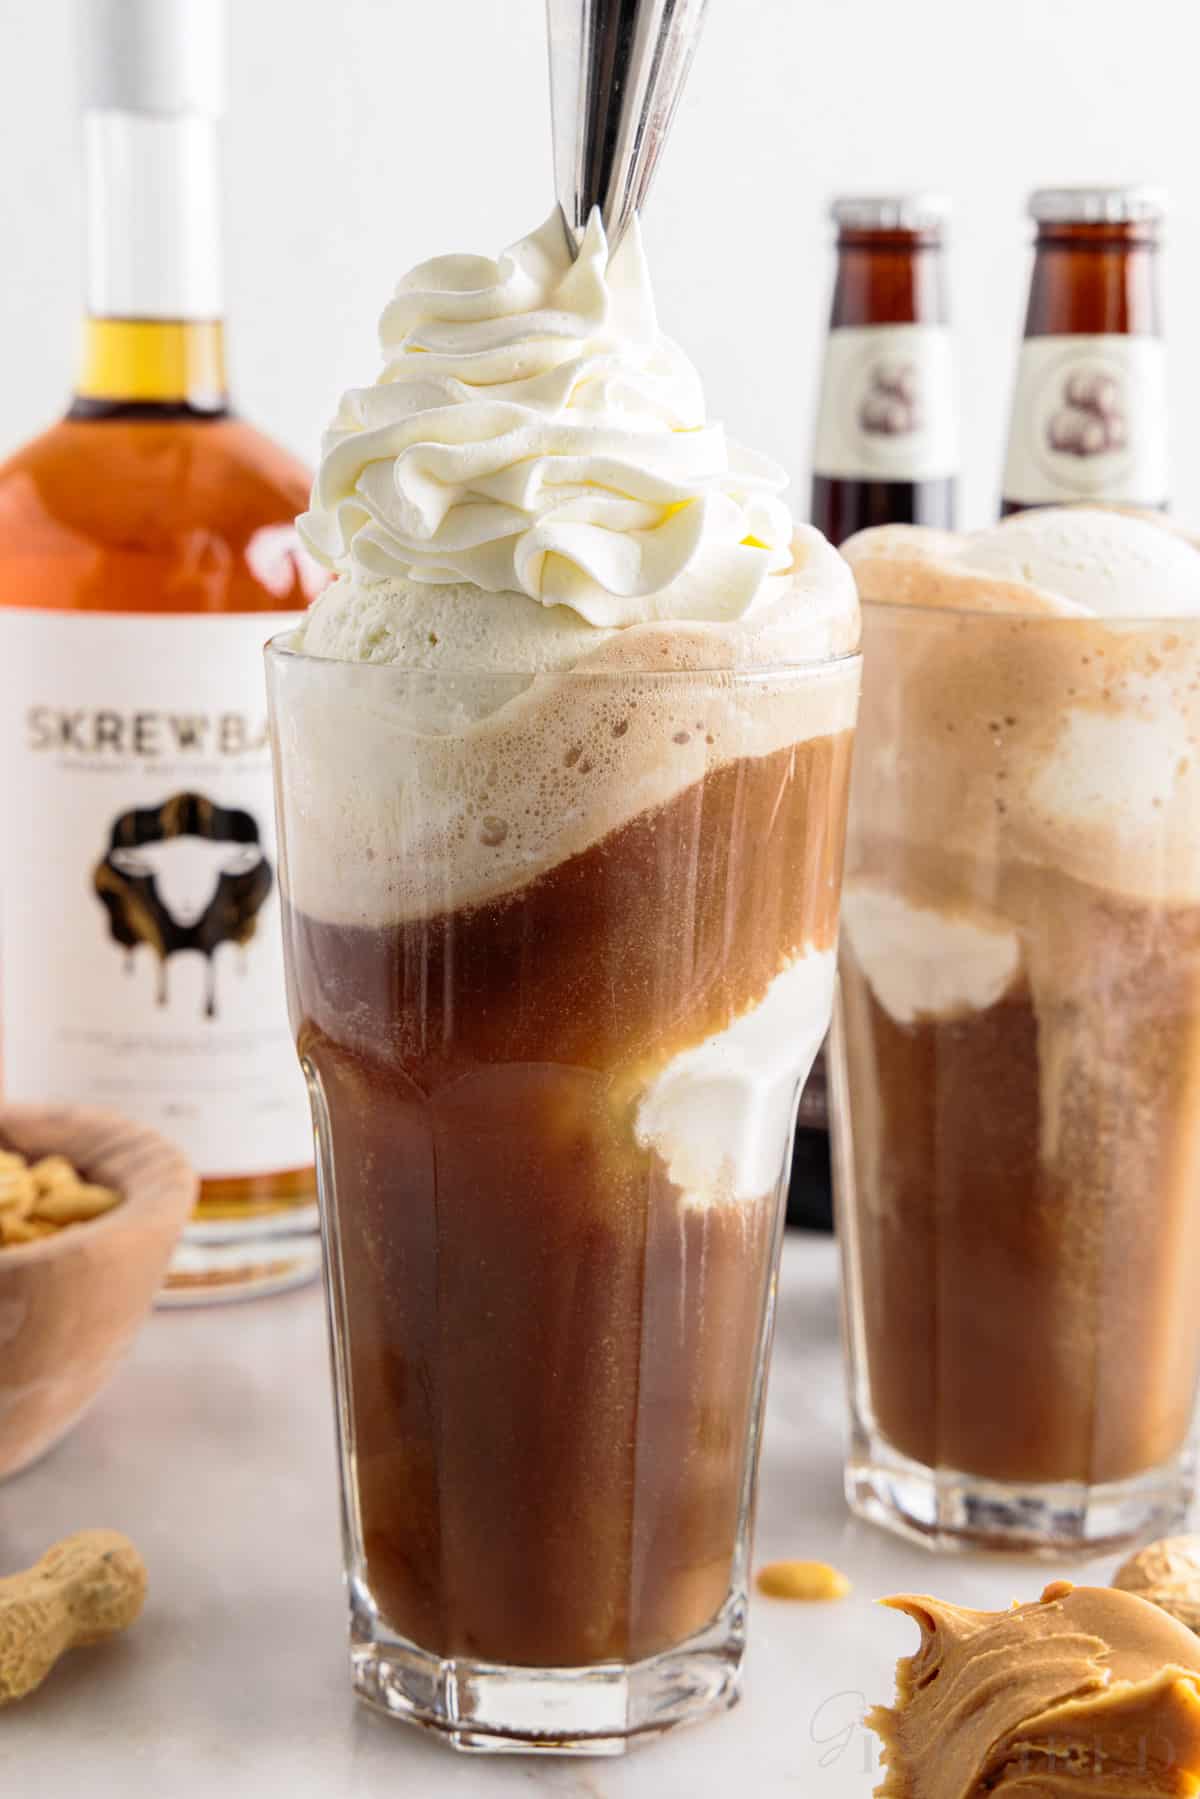 Whipped cream added to the top of a glass of peanut butter root beer whiskey with a second glass behind it.